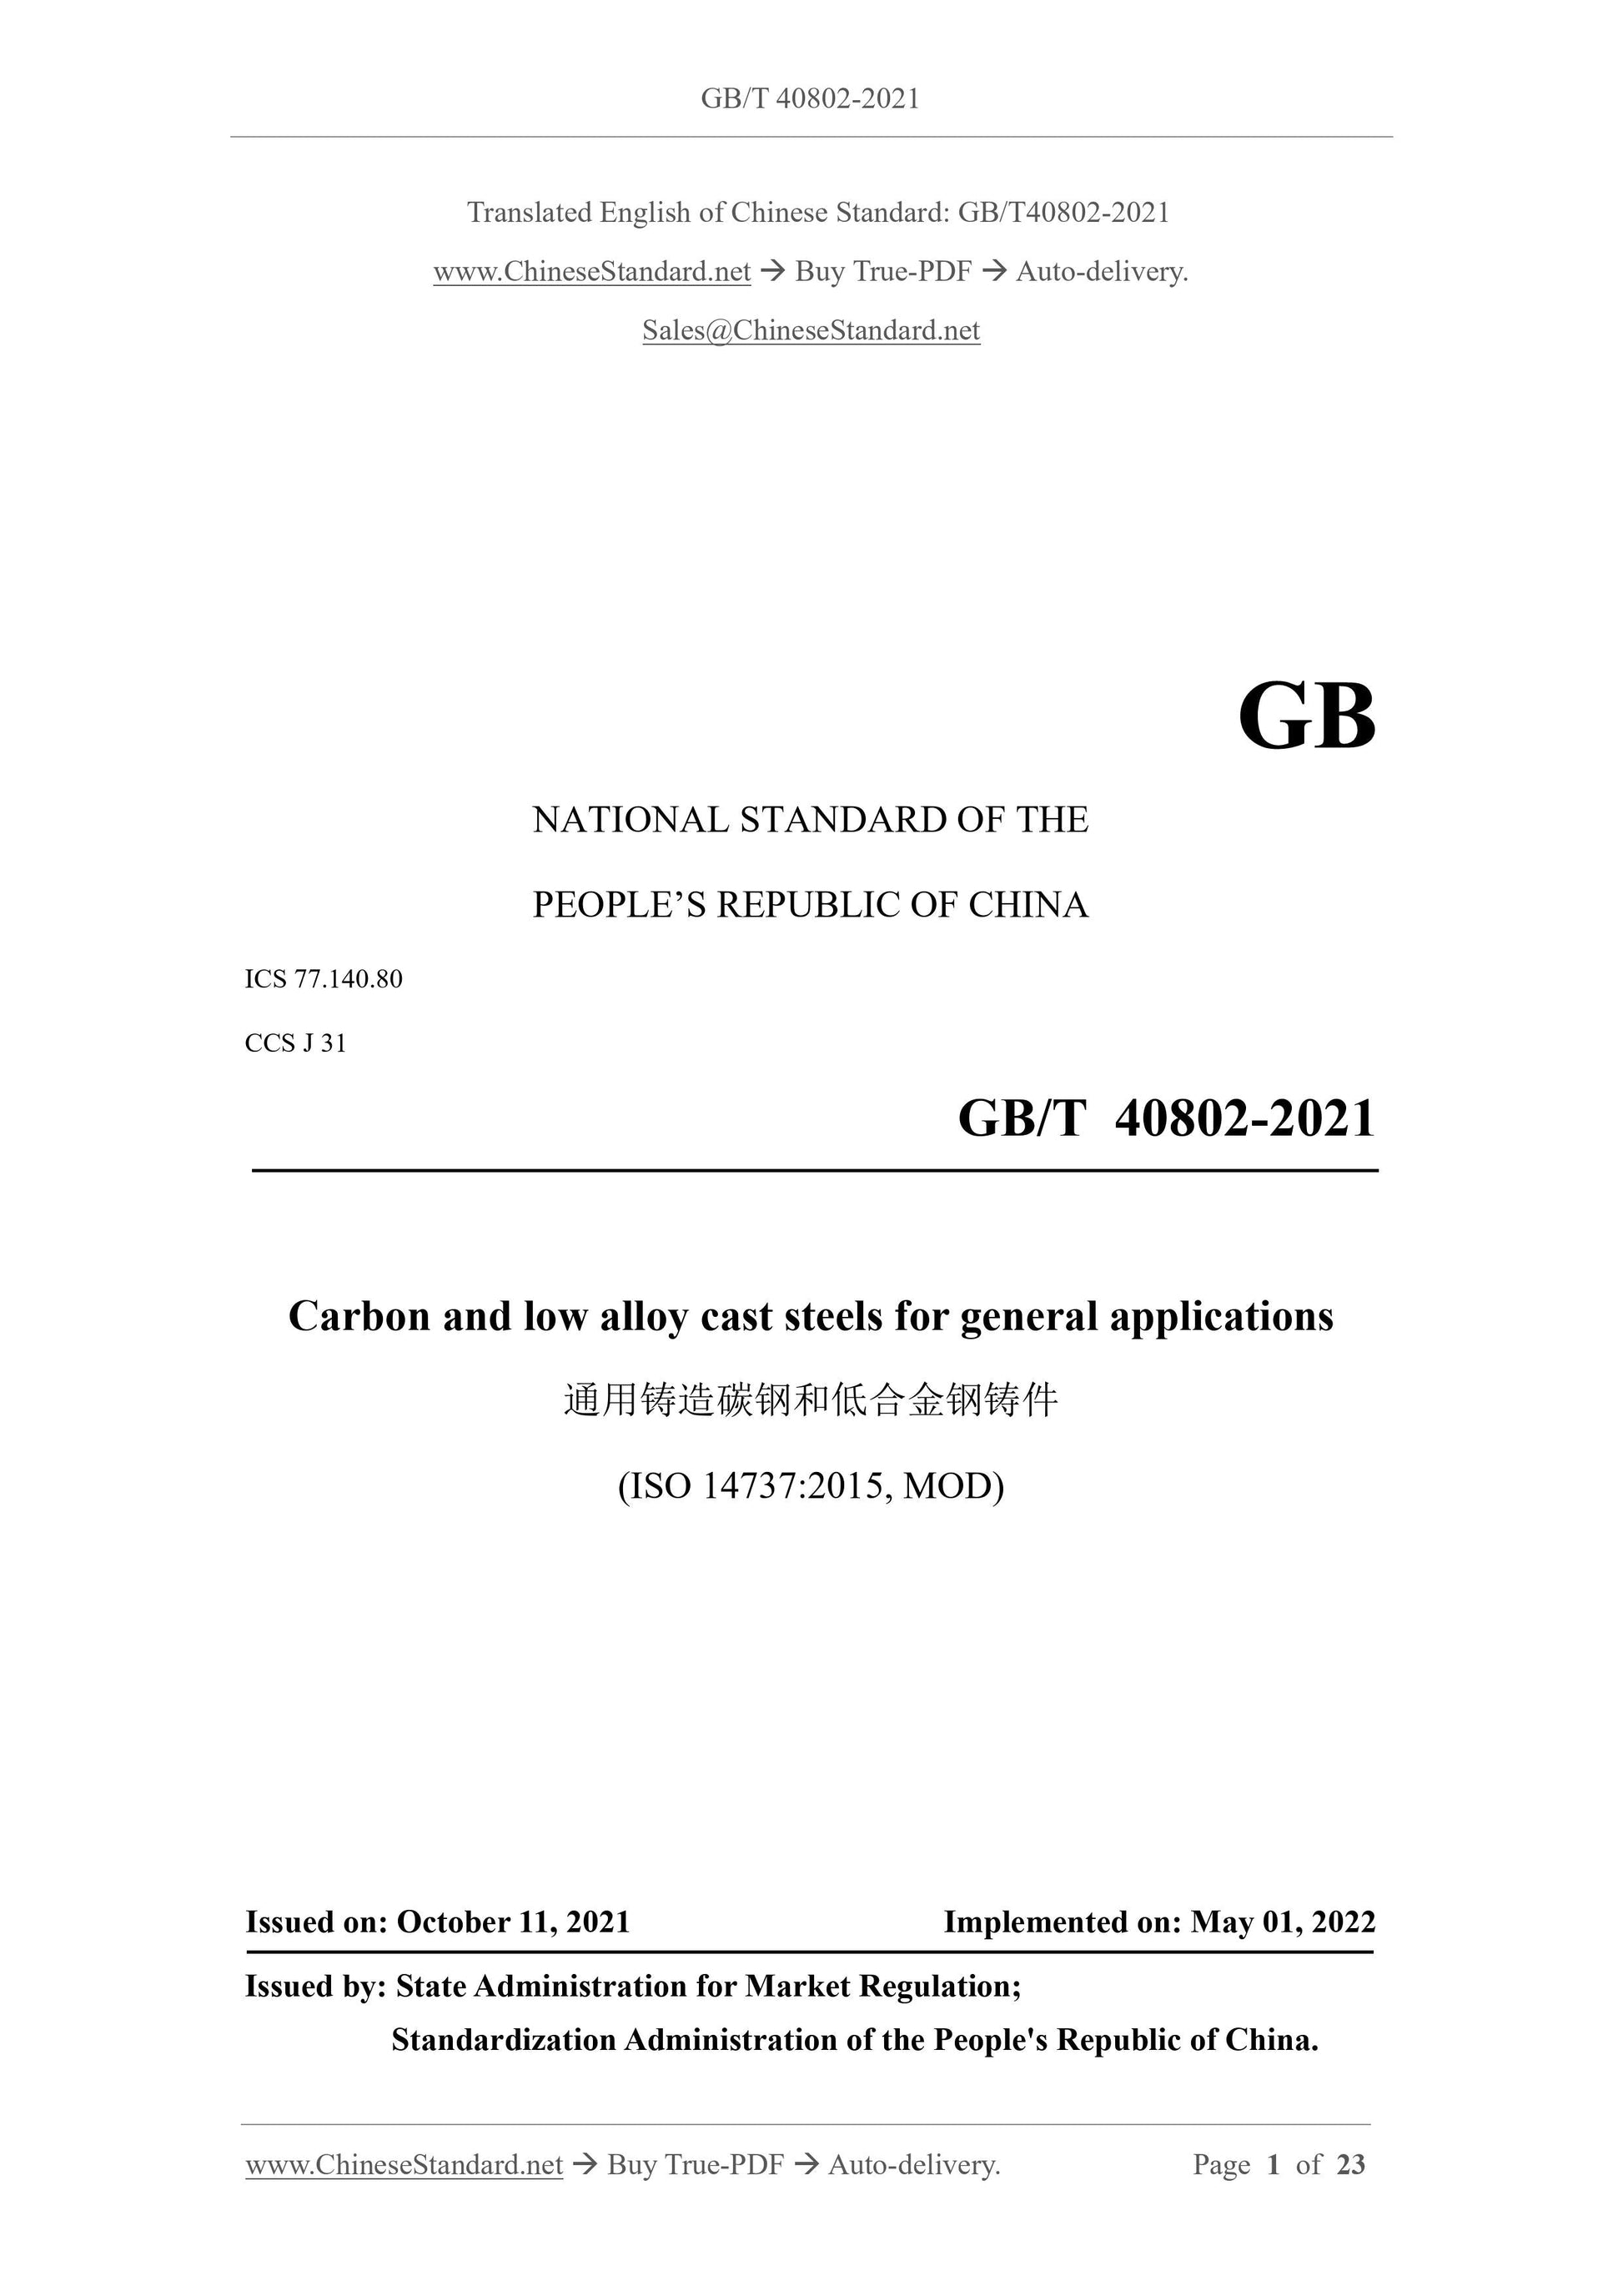 GB/T 40802-2021 Page 1